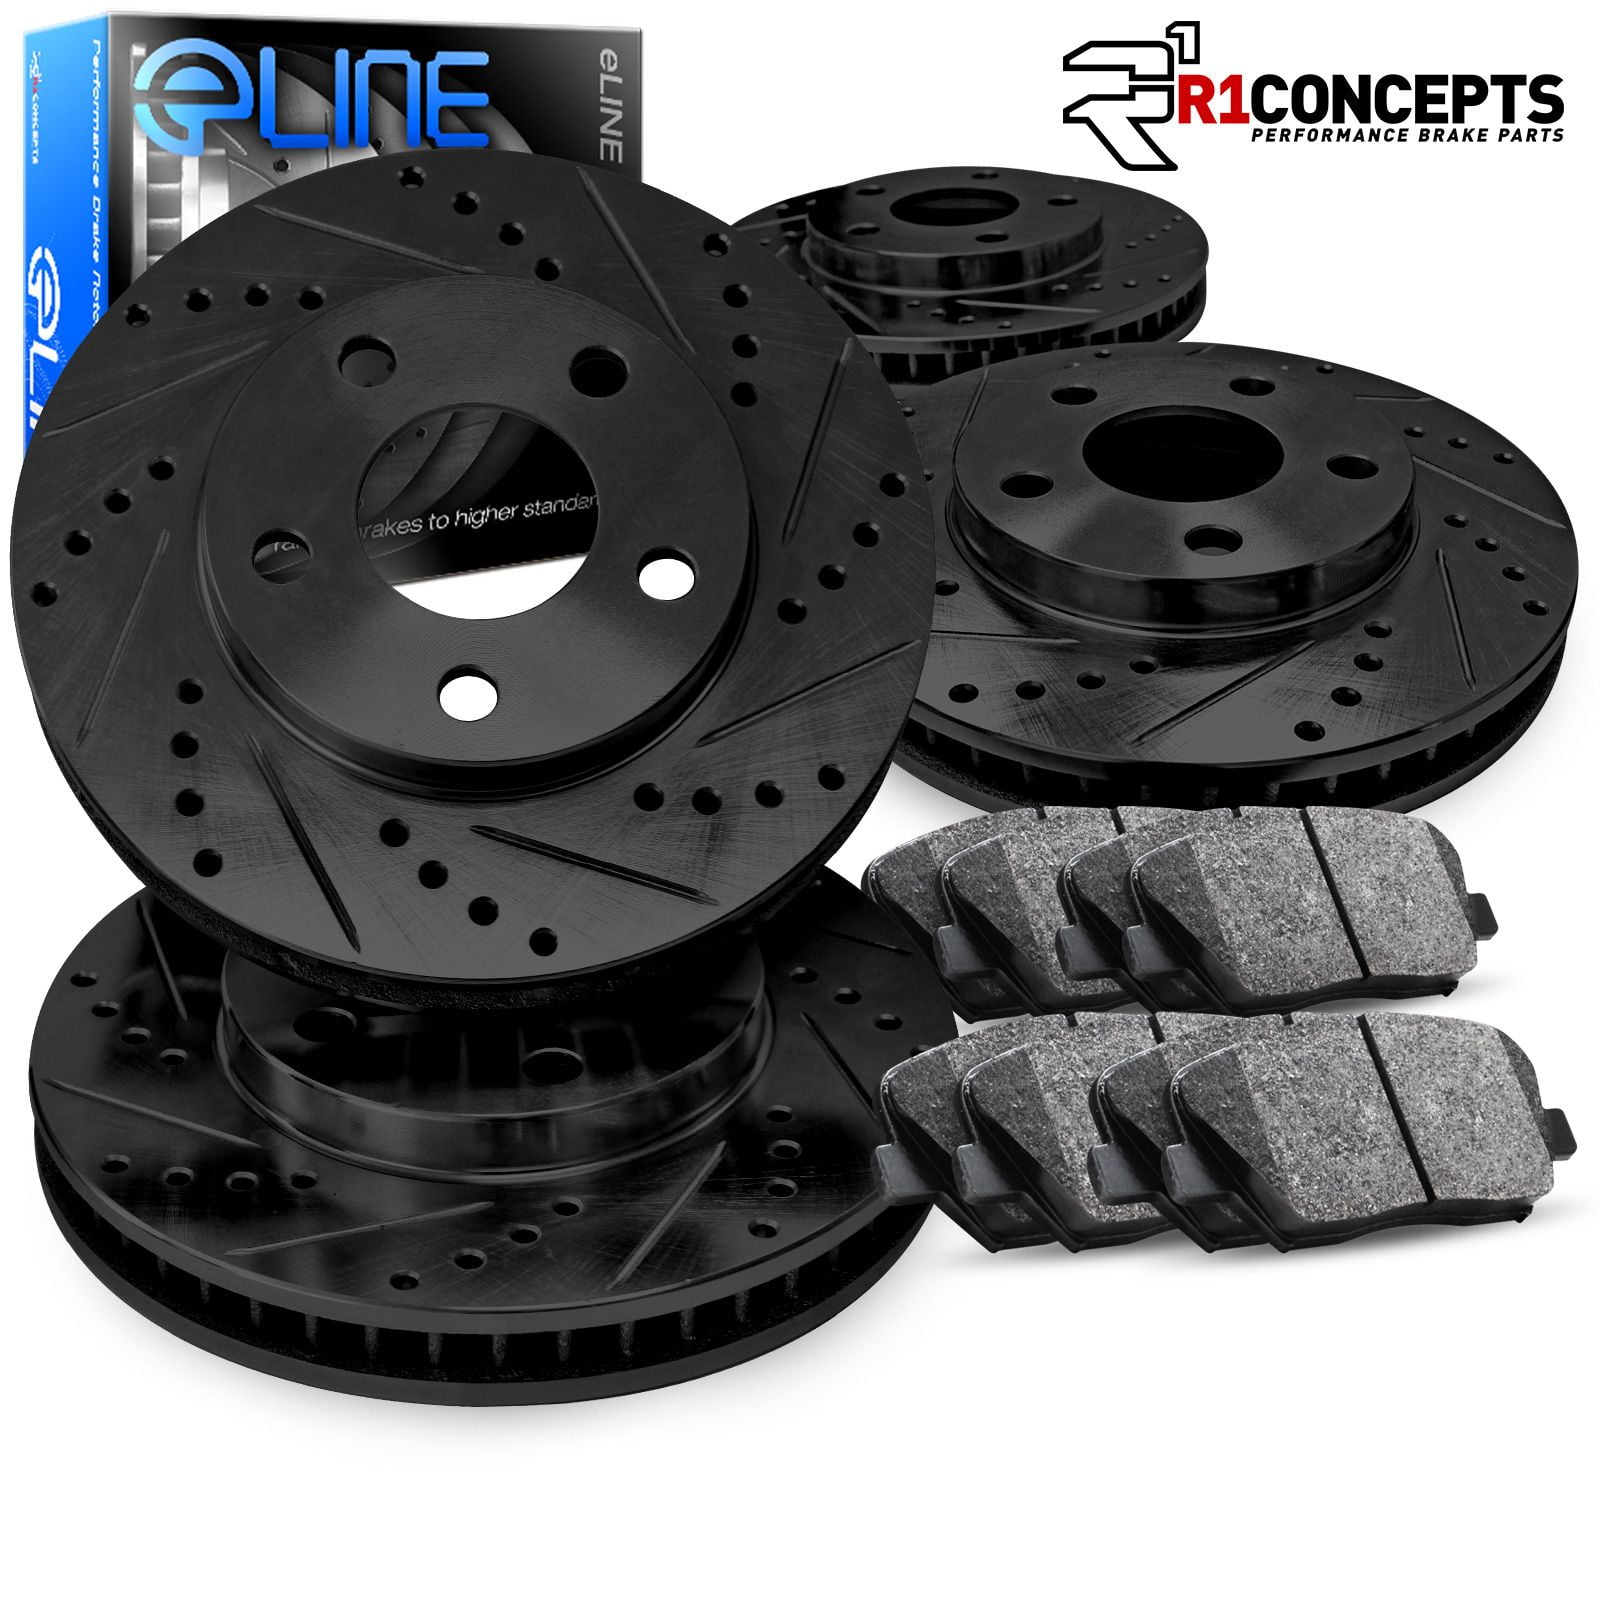 Brake Pads for 2008-2015 Scion xB Front & Rear Drilled Slotted Brake Rotors 